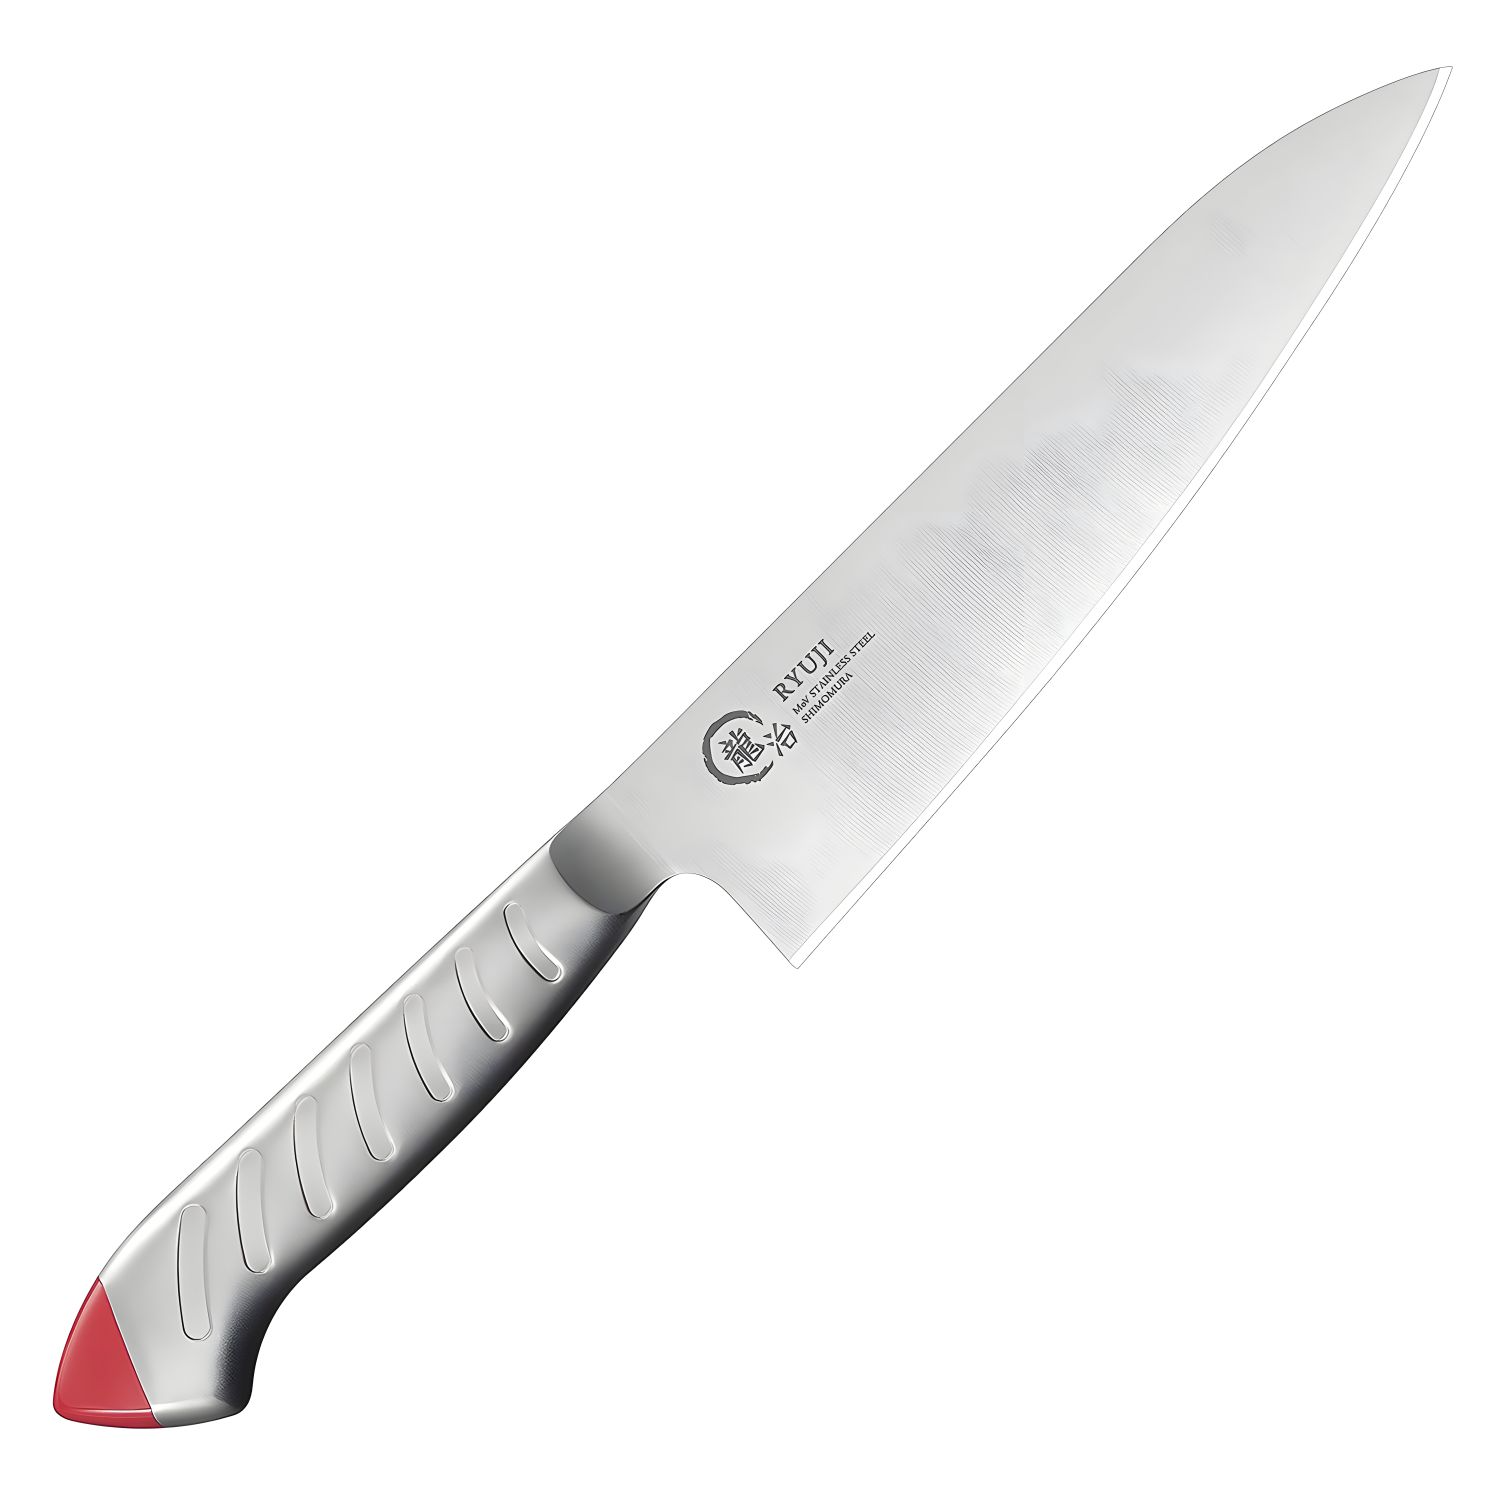 https://cdn.shopify.com/s/files/1/1610/3863/products/ShimomuraMolybdenumSteelGyutoKnifeALY8801_2_1600x.png?v=1652103923